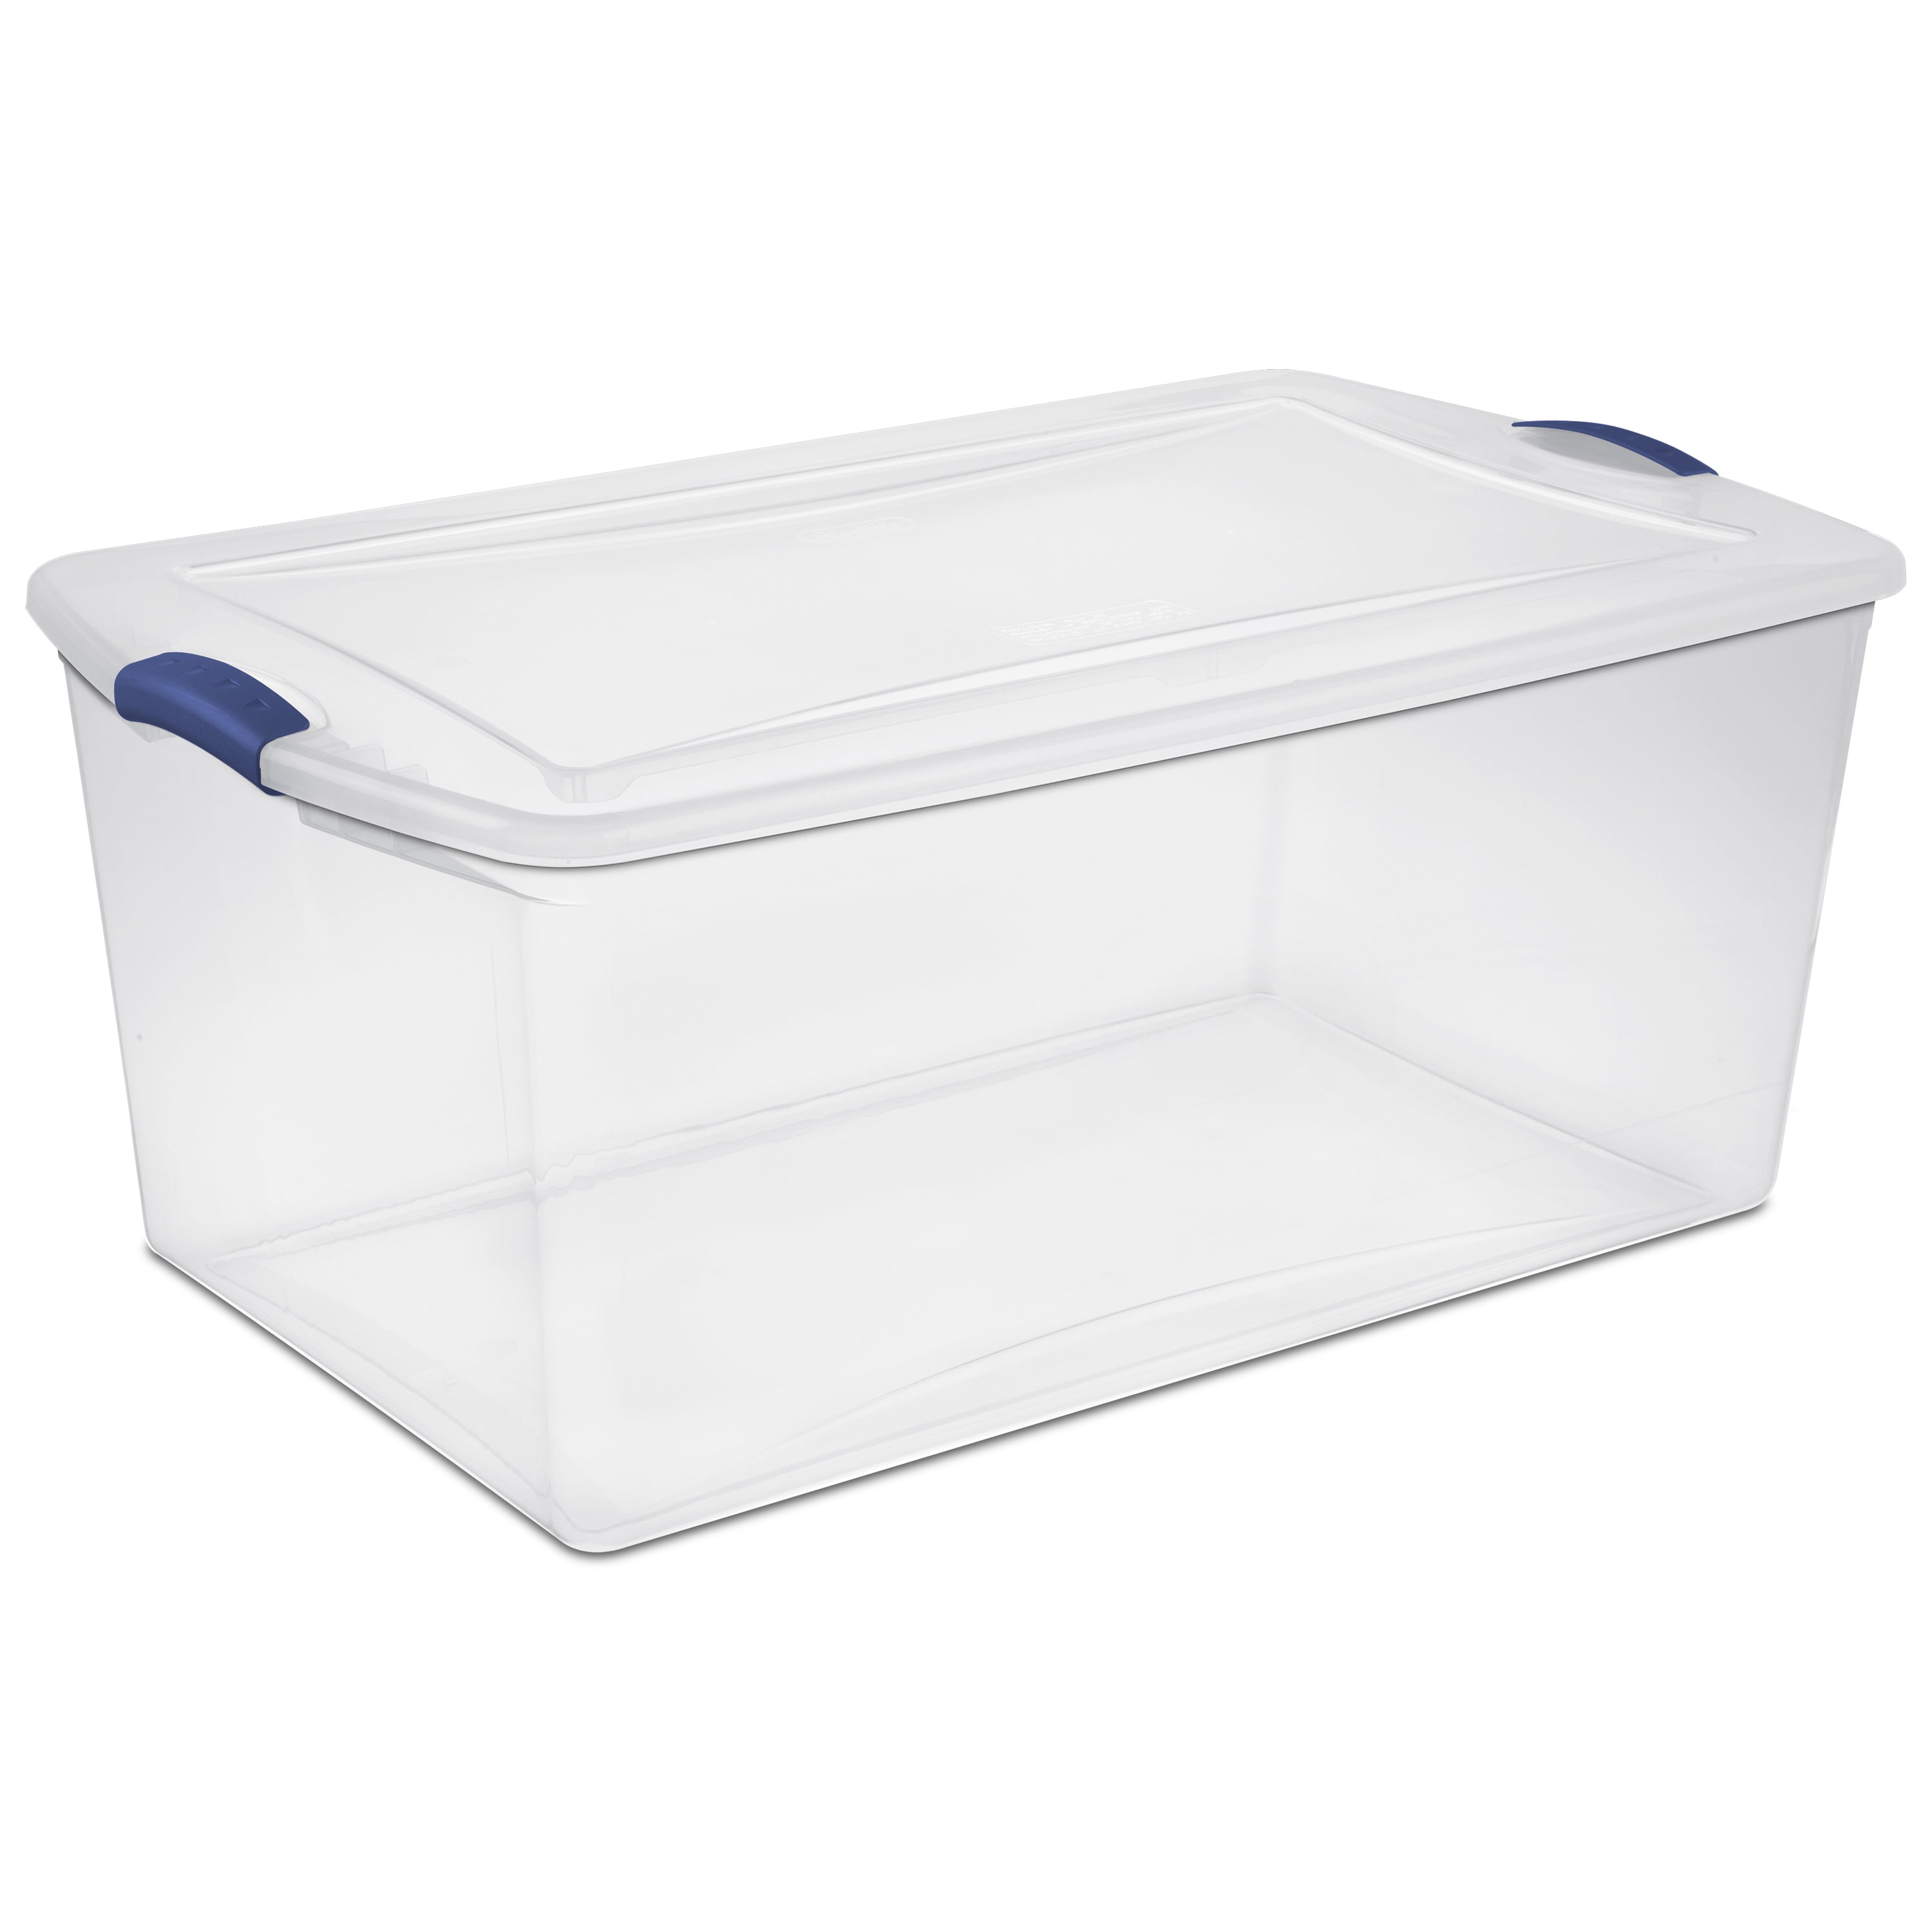 6 PACK 66 Qt Large Clear Plastic Storage Containers Lid Latch Box Organizer NEW 